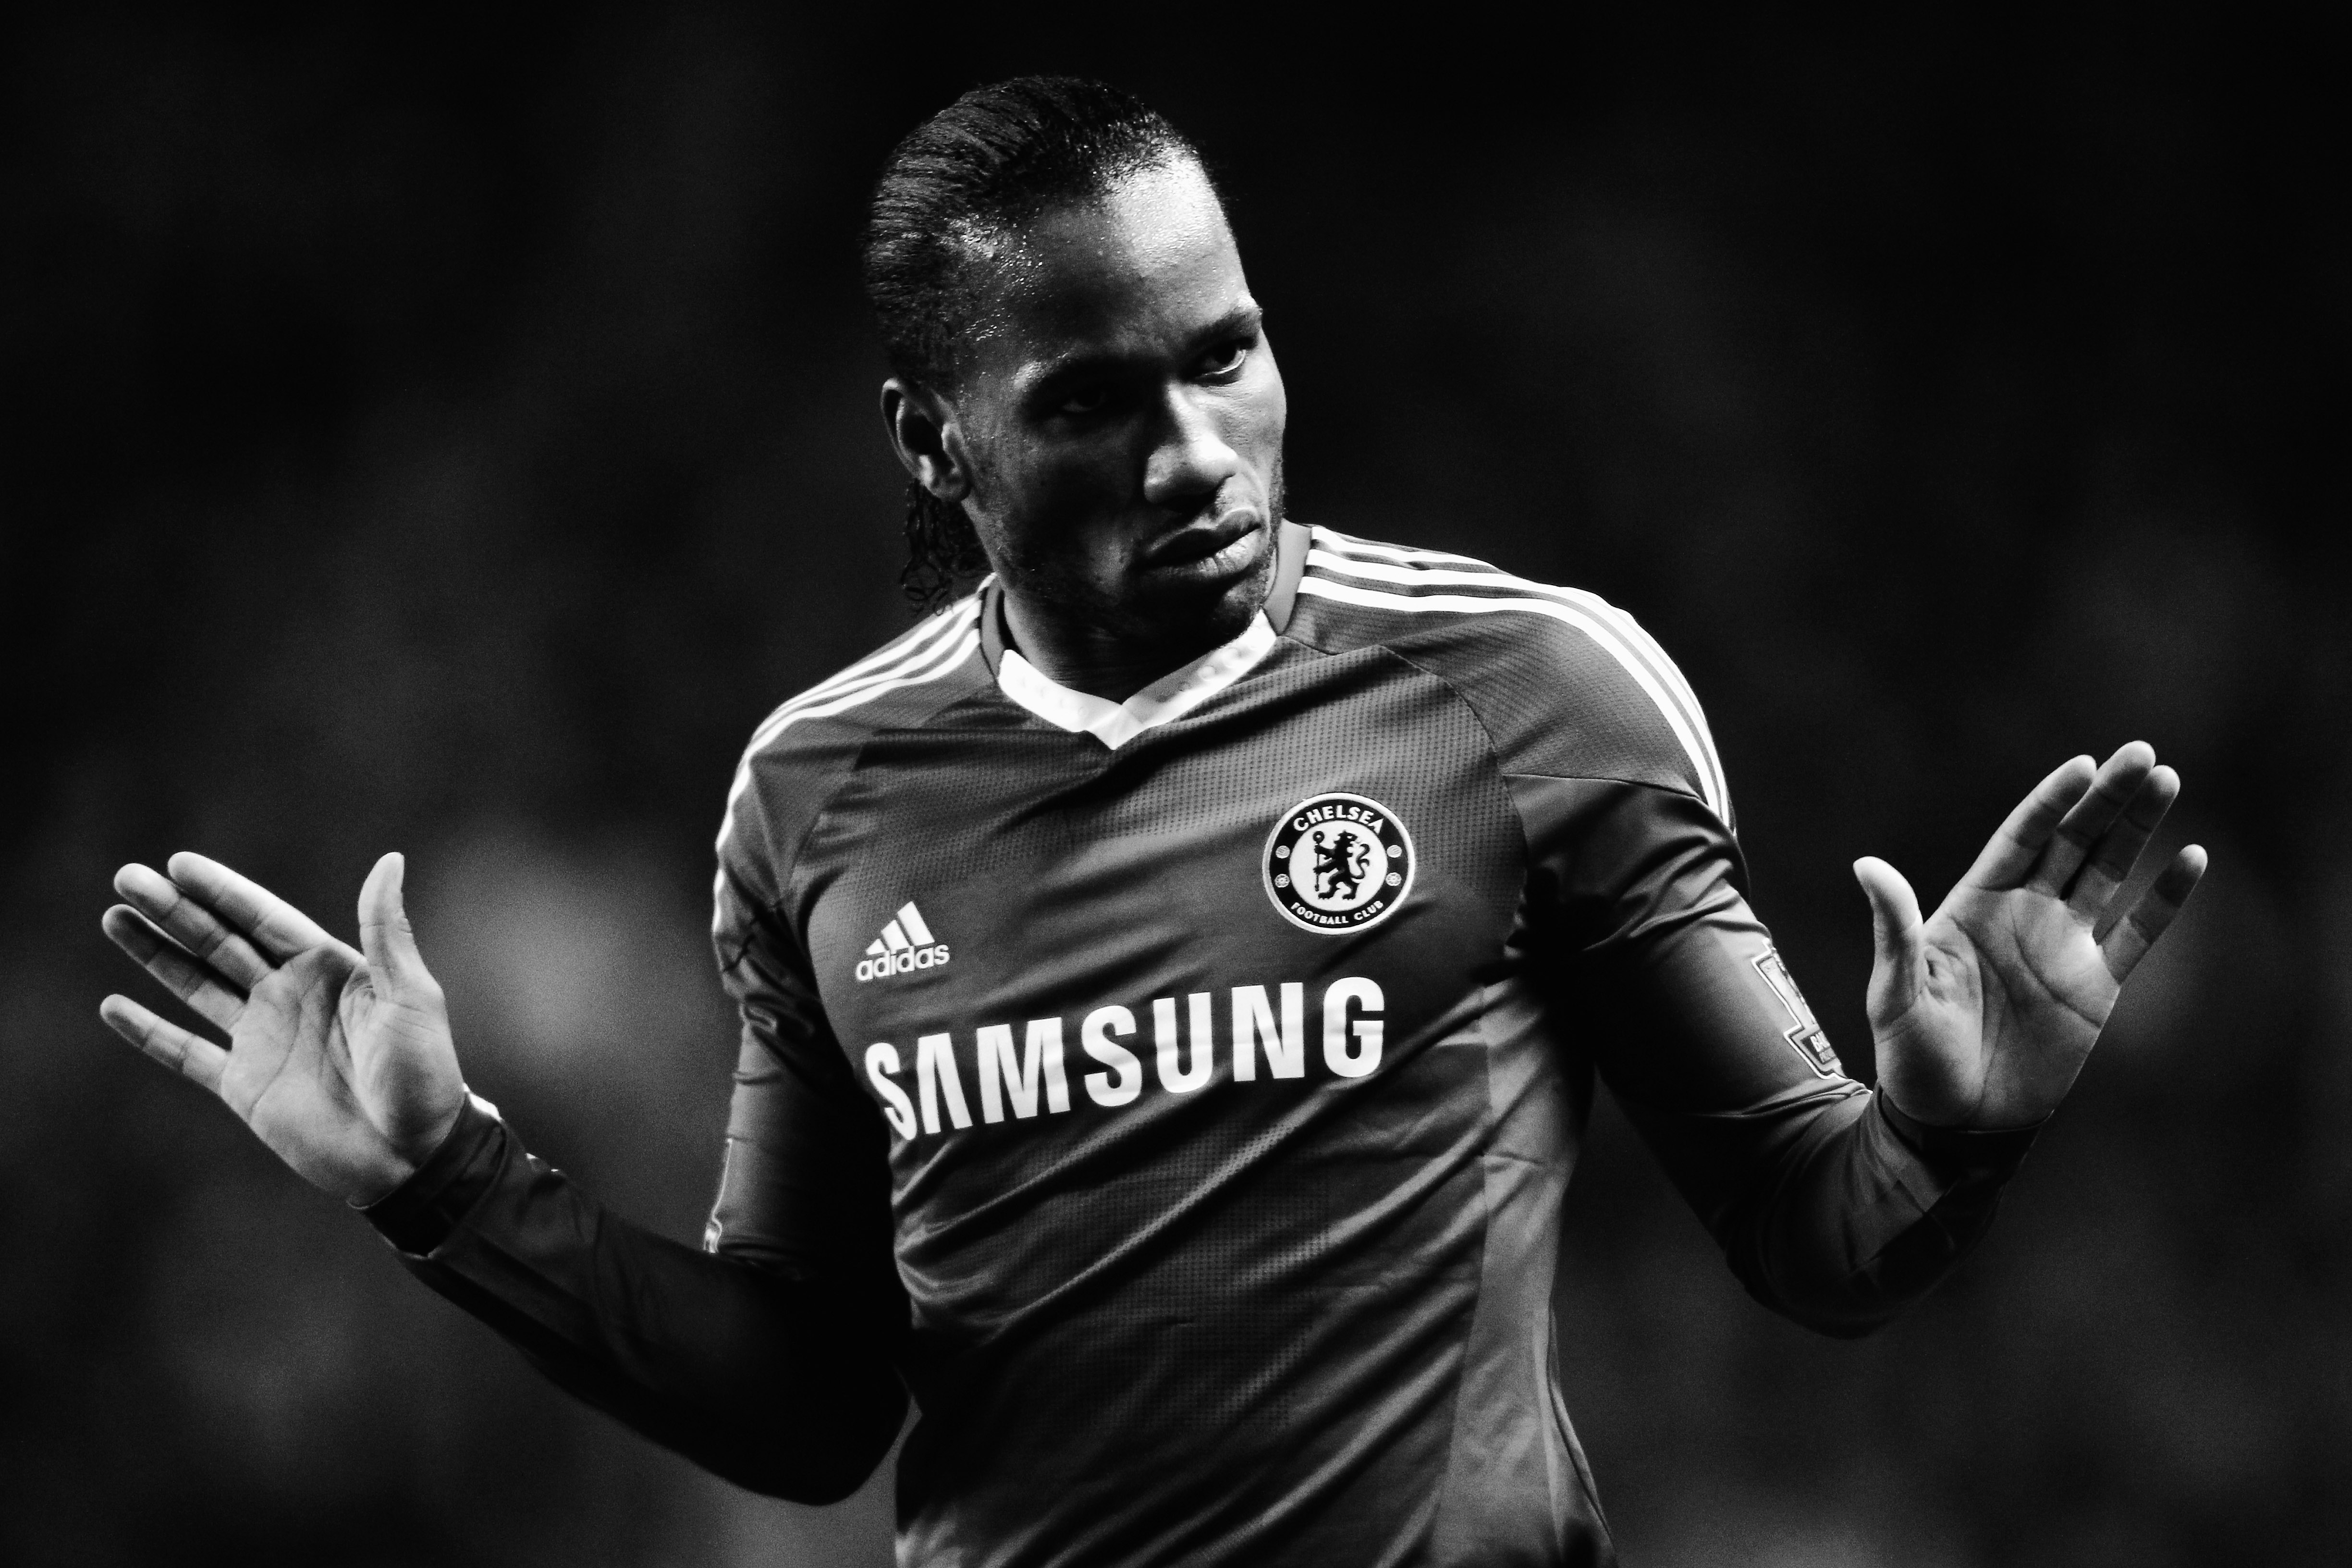 WOLVERHAMPTON, UNITED KINGDOM - JANUARY 05:  (EDITORS NOTE: THIS BLACK AND WHITE IMAGE WAS CREATED FROM ORIGINAL COLOUR FILE)  Didier Drogba of Chelsea reacts during the Barclays Premier League match between Wolverhampton Wanderers and Chelsea at Molineux